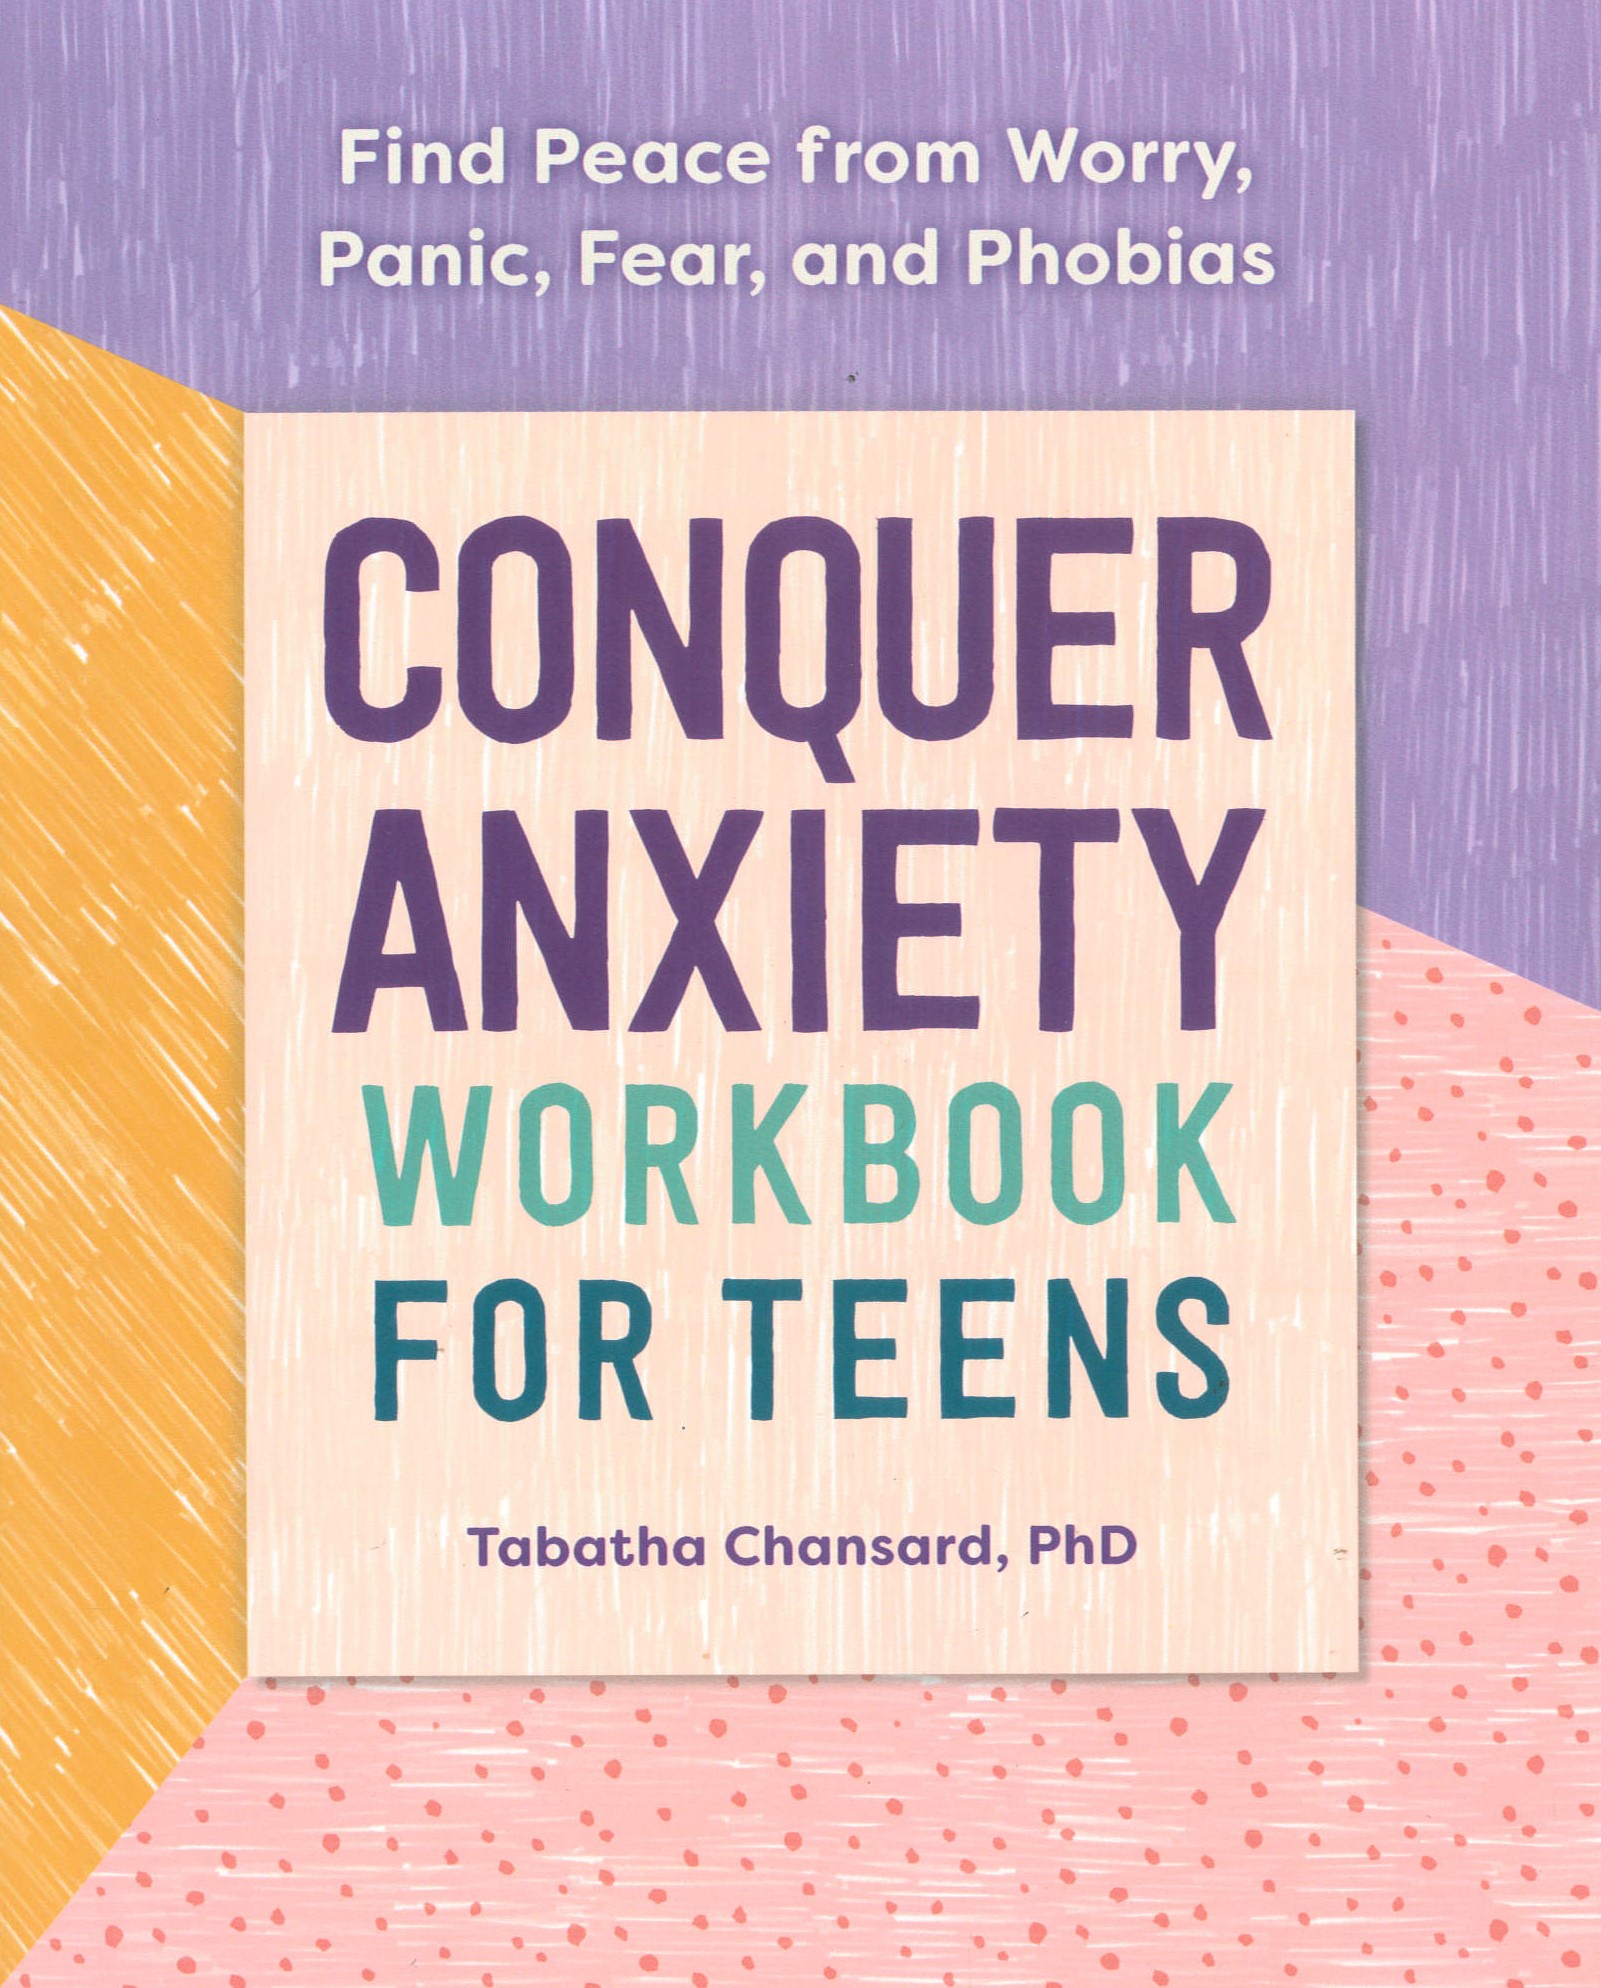 Conquer Anxiety Workbook for Teens : Find Peace from Worry, Panic, Fear, and Phobias /